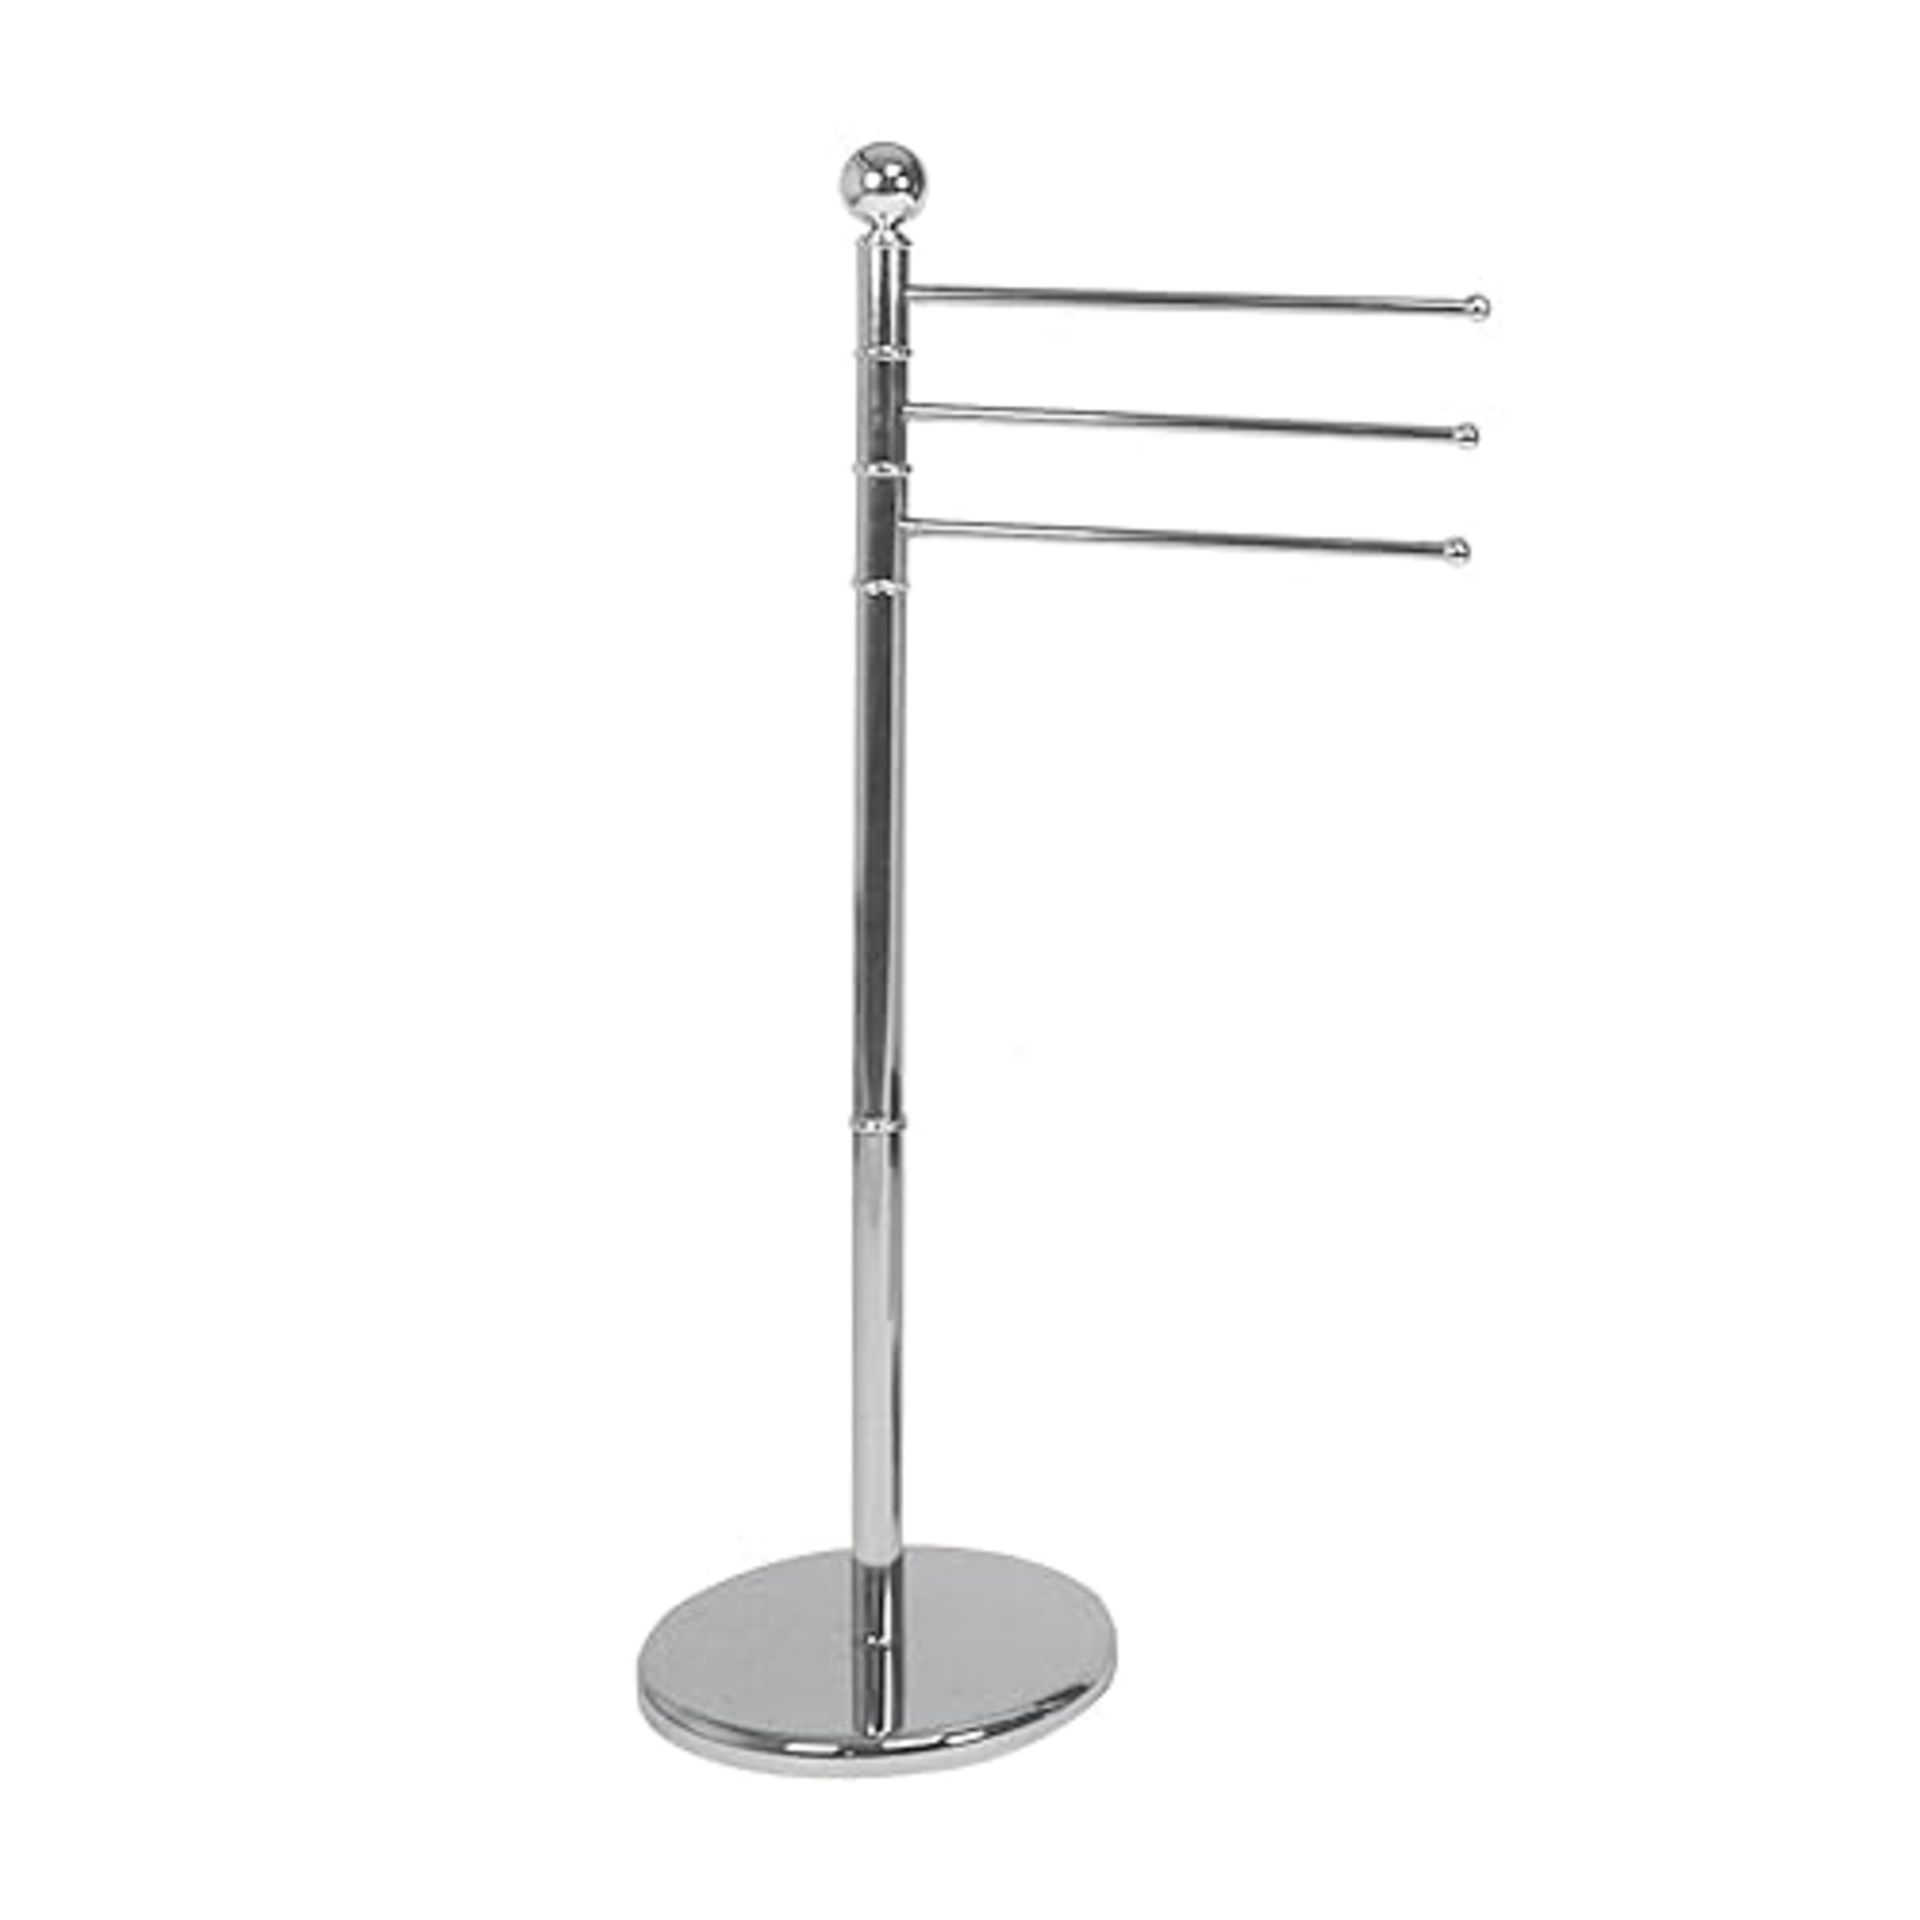 WENKO Exclusive towel and clothes stand Chrome - 3 flexible arms, Steel, 48.5 x 90 x 28.5 cm, Chrom